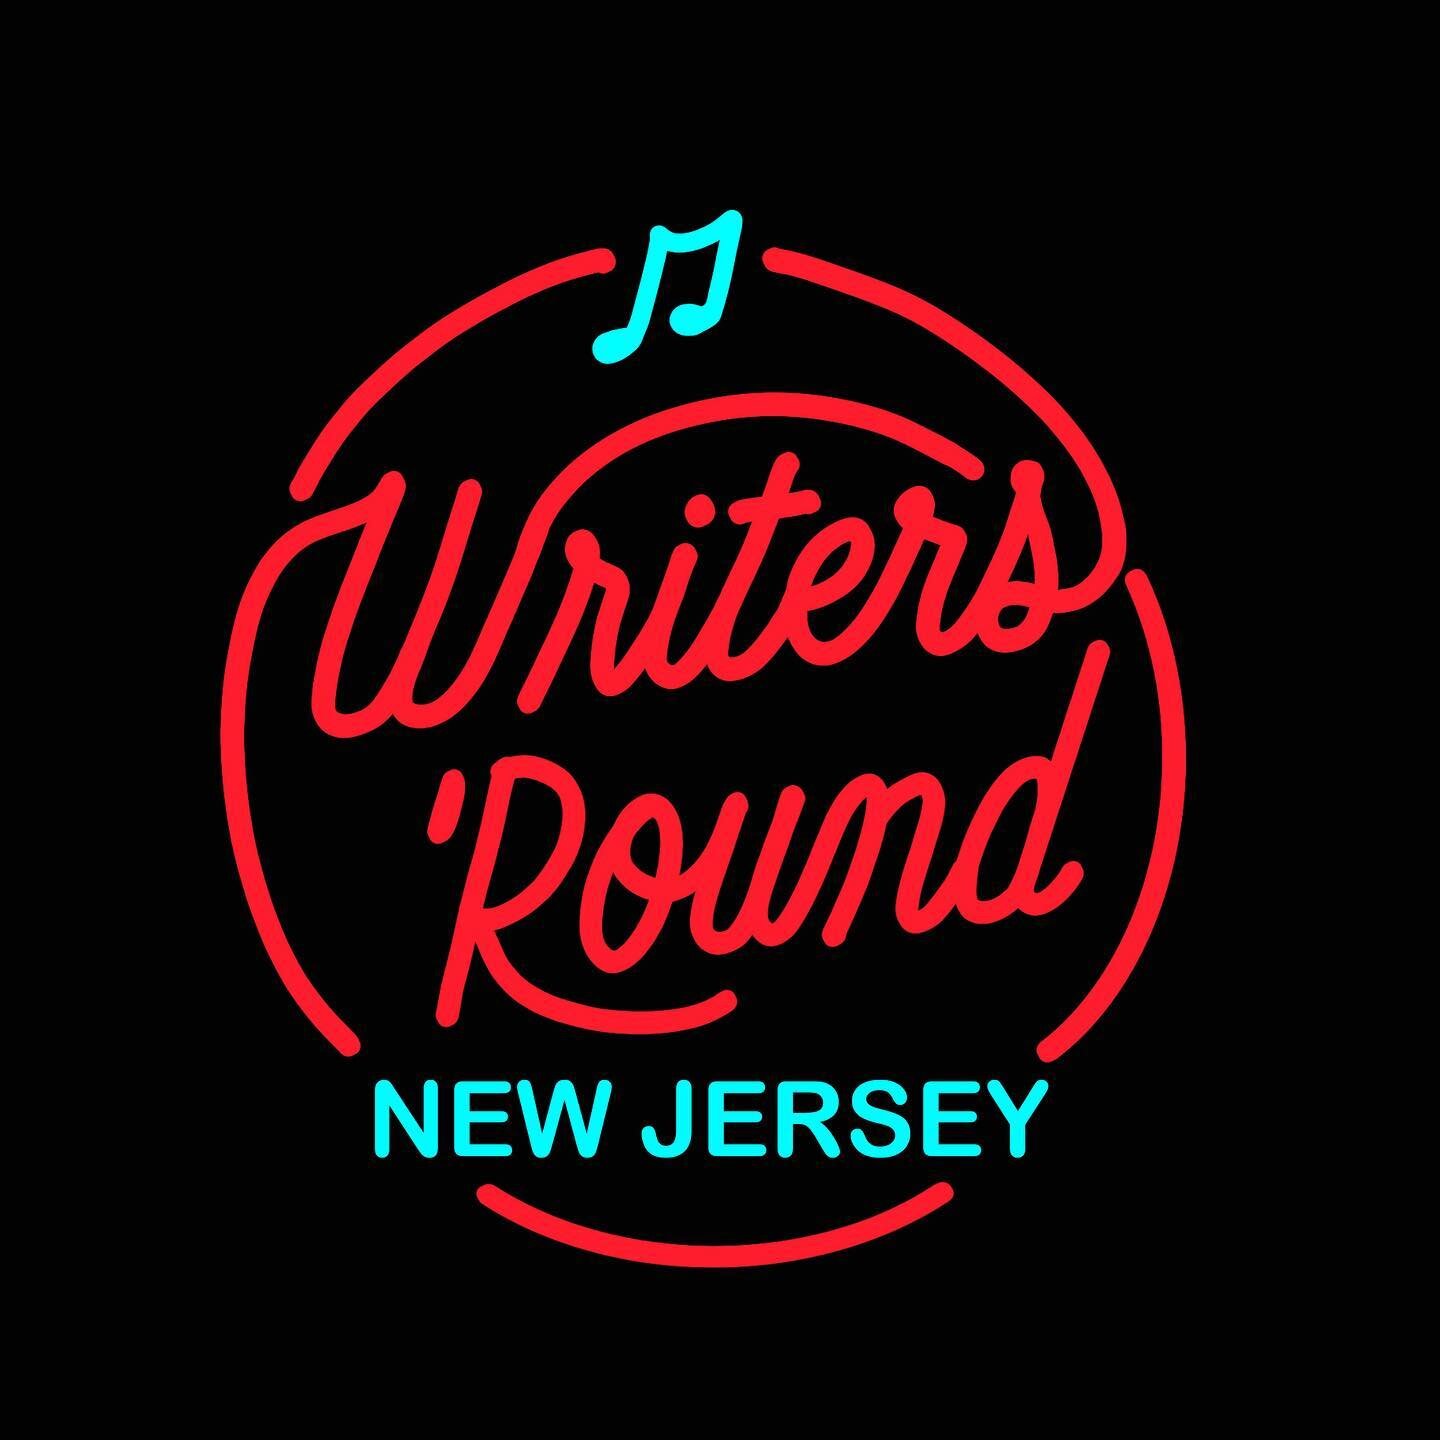 Tonight at @crossroadsgarwoodnj I&rsquo;ll be performing a few tunes in writers round style, sharing the stage and the night with some incredible artists! My set will be at 9, but come early to check out the other folks, it&rsquo;s going to be a grea